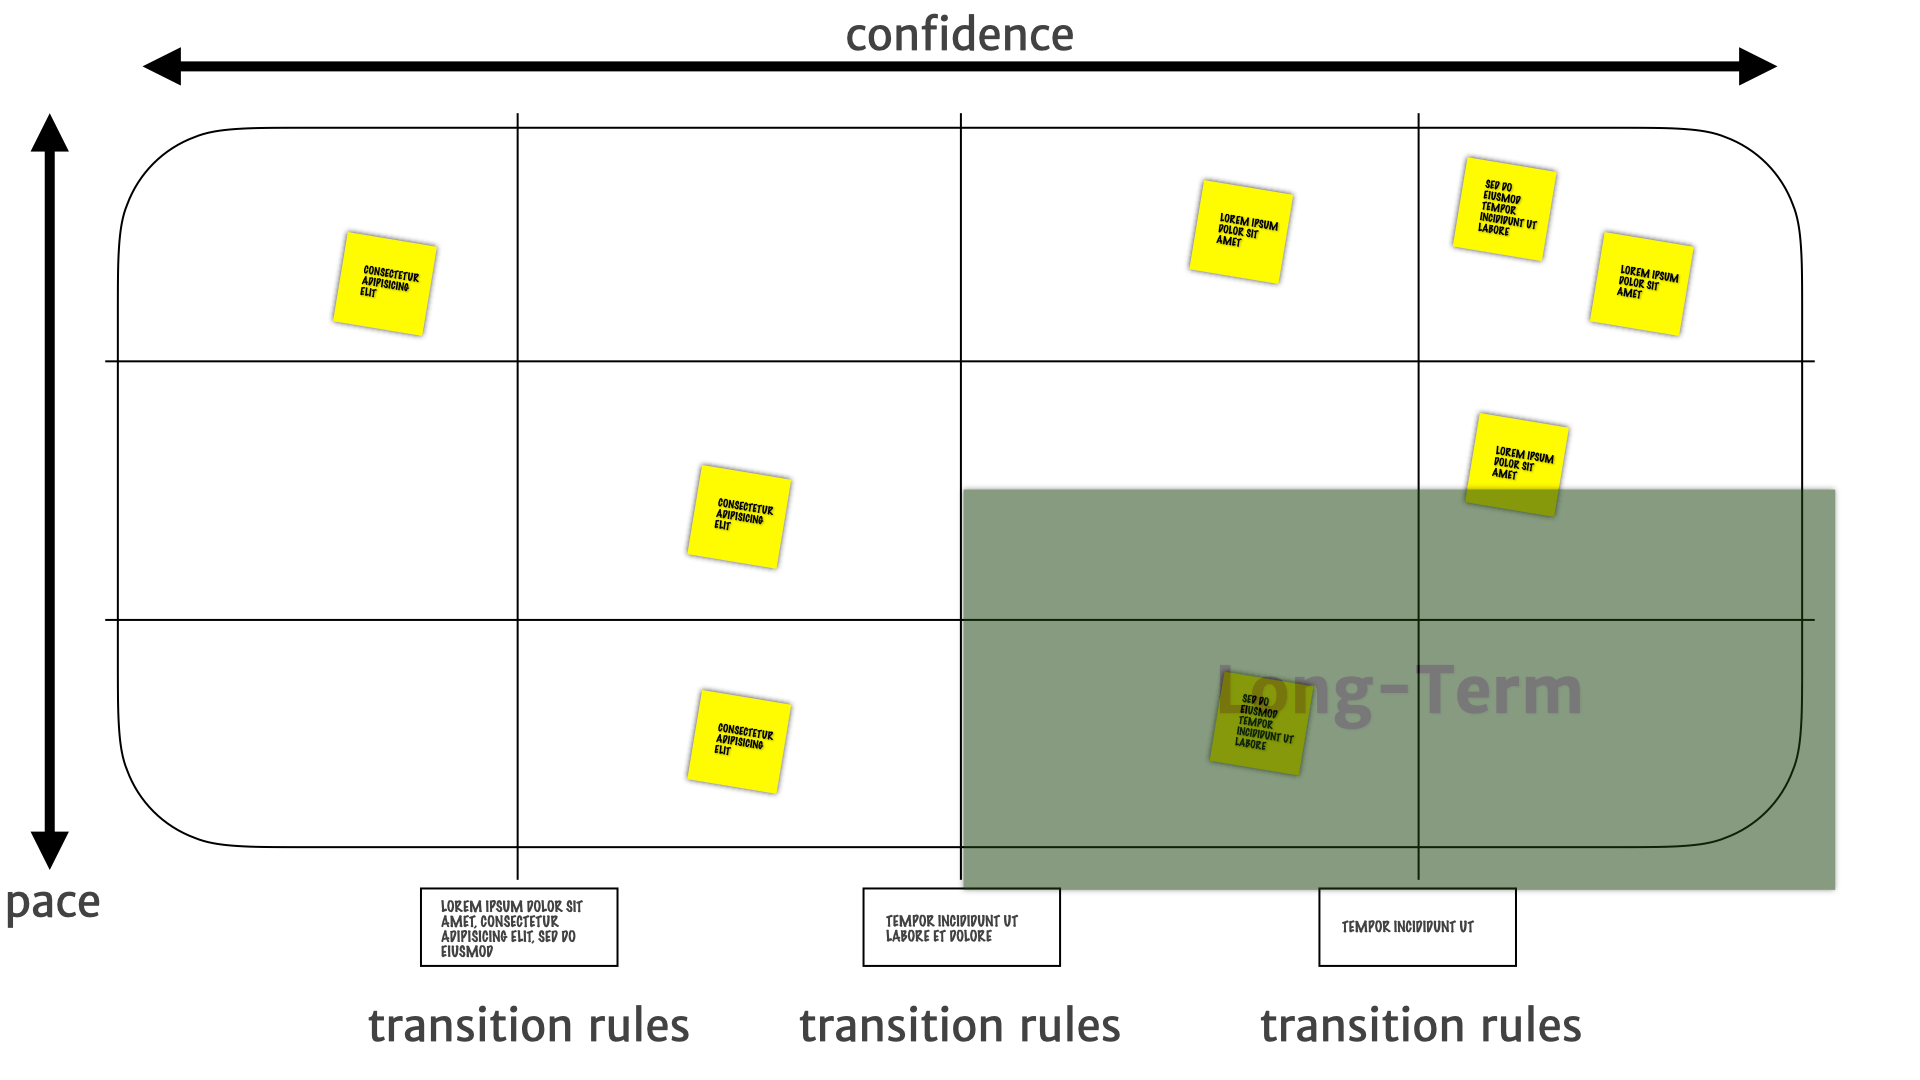 A pace layer map with the bottom-right quadrant highlighted and labelled 'long-term'.